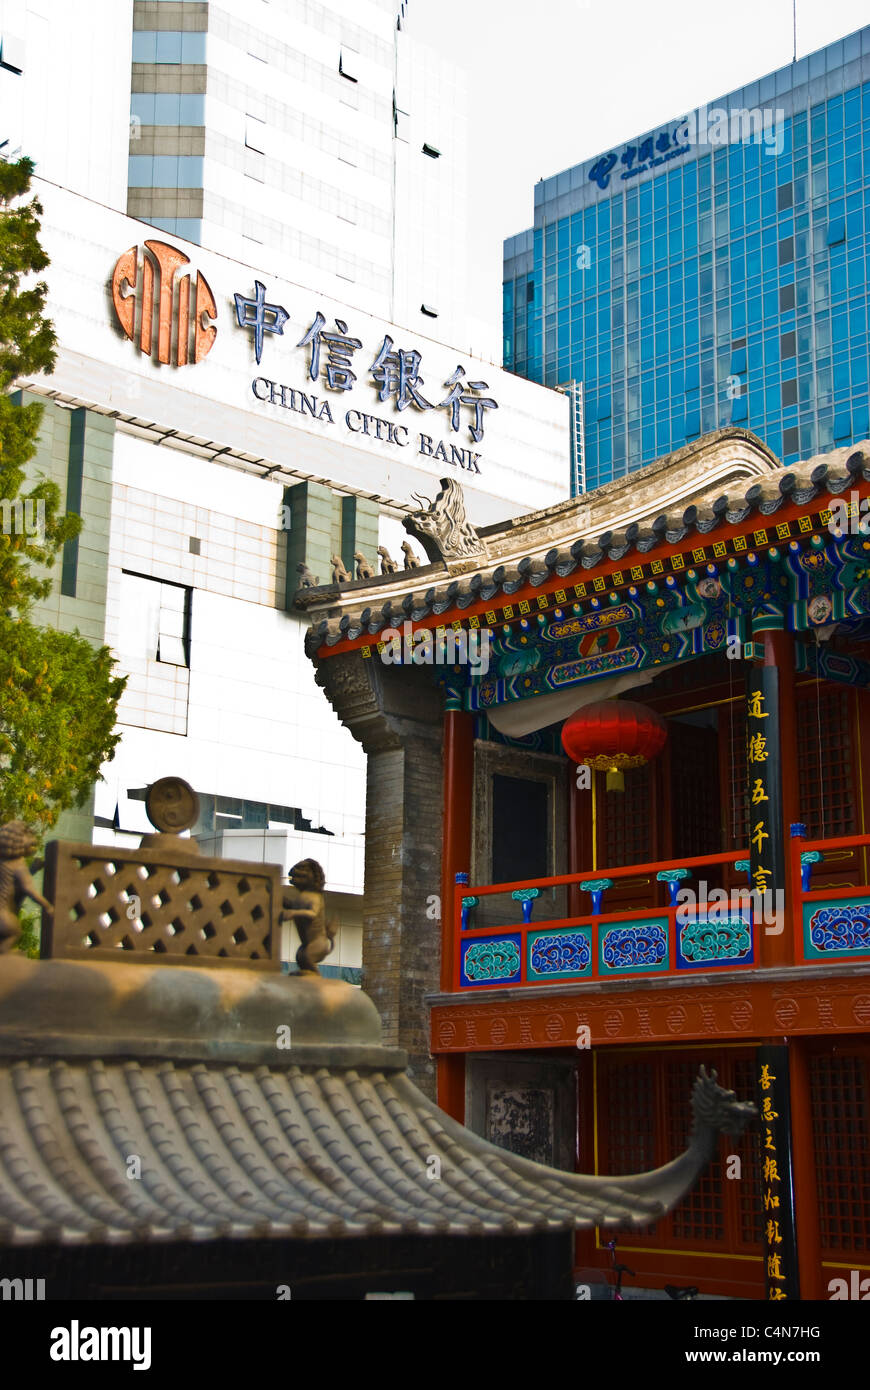 Beijing, China, Temple in Financial St District with Contrast Modern Bank Buildings 'China Civic Bank' Stock Photo